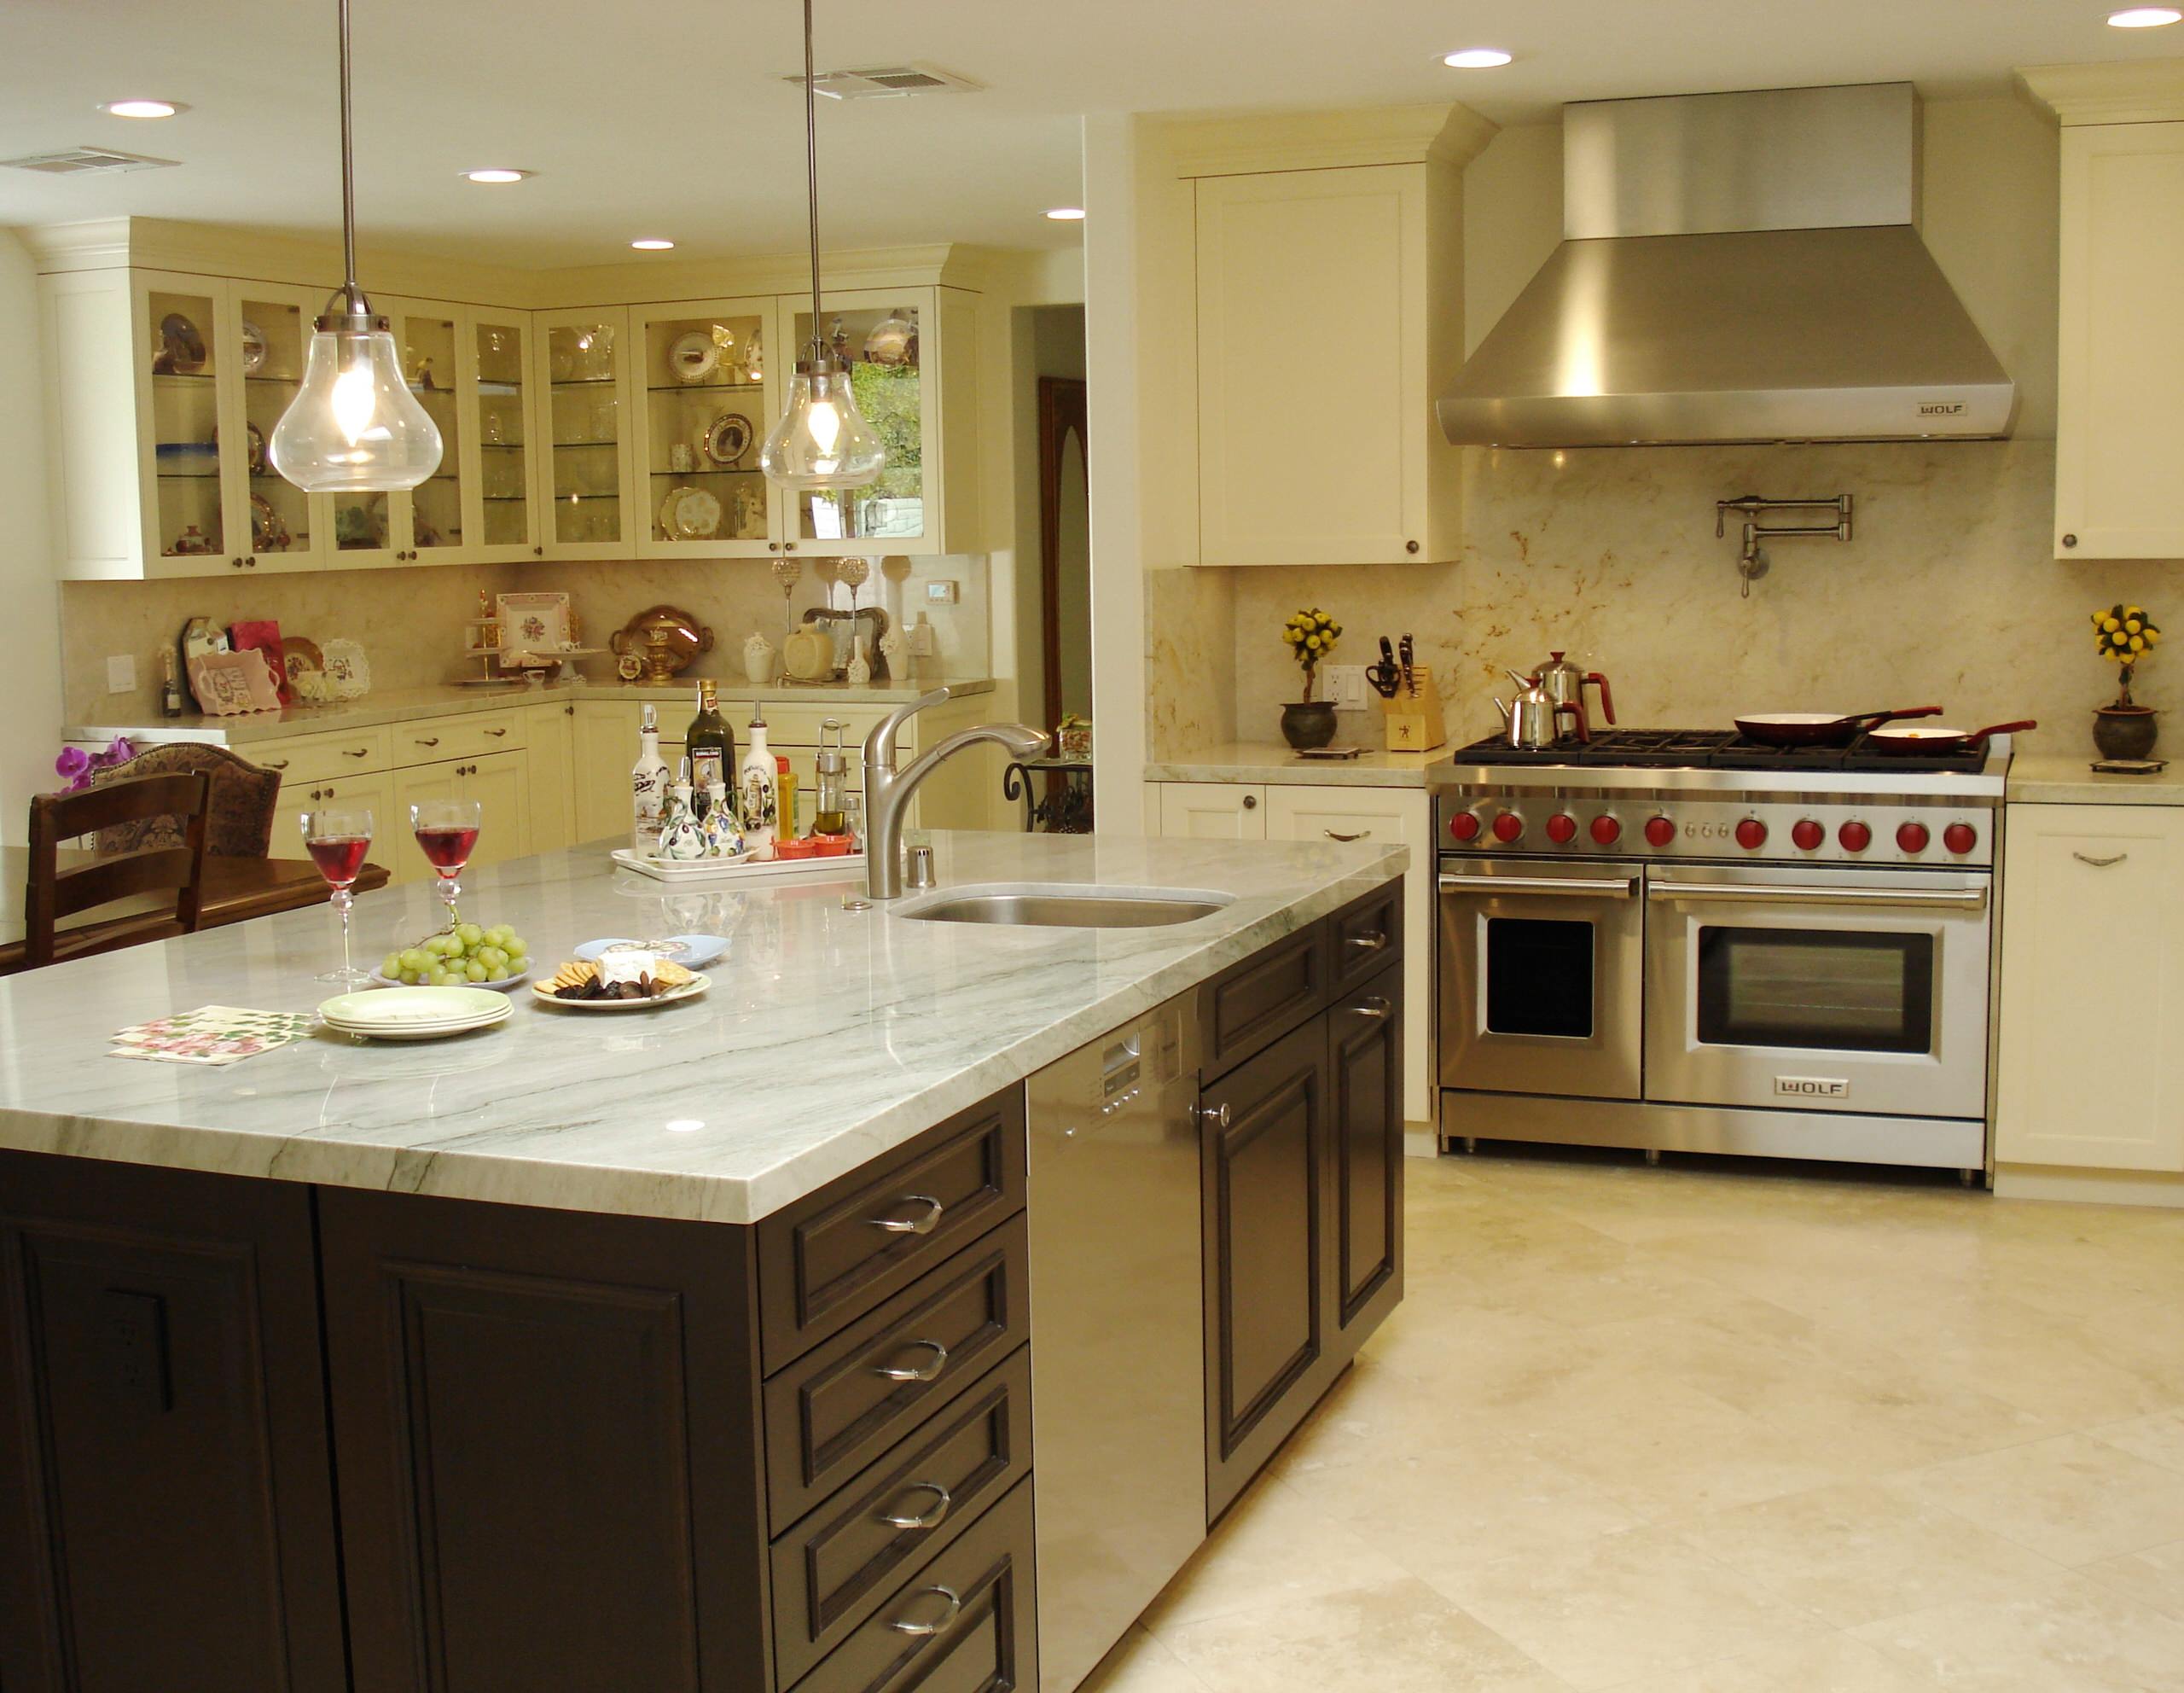 My Kitchen Remodel for a Bel Air, California Estate